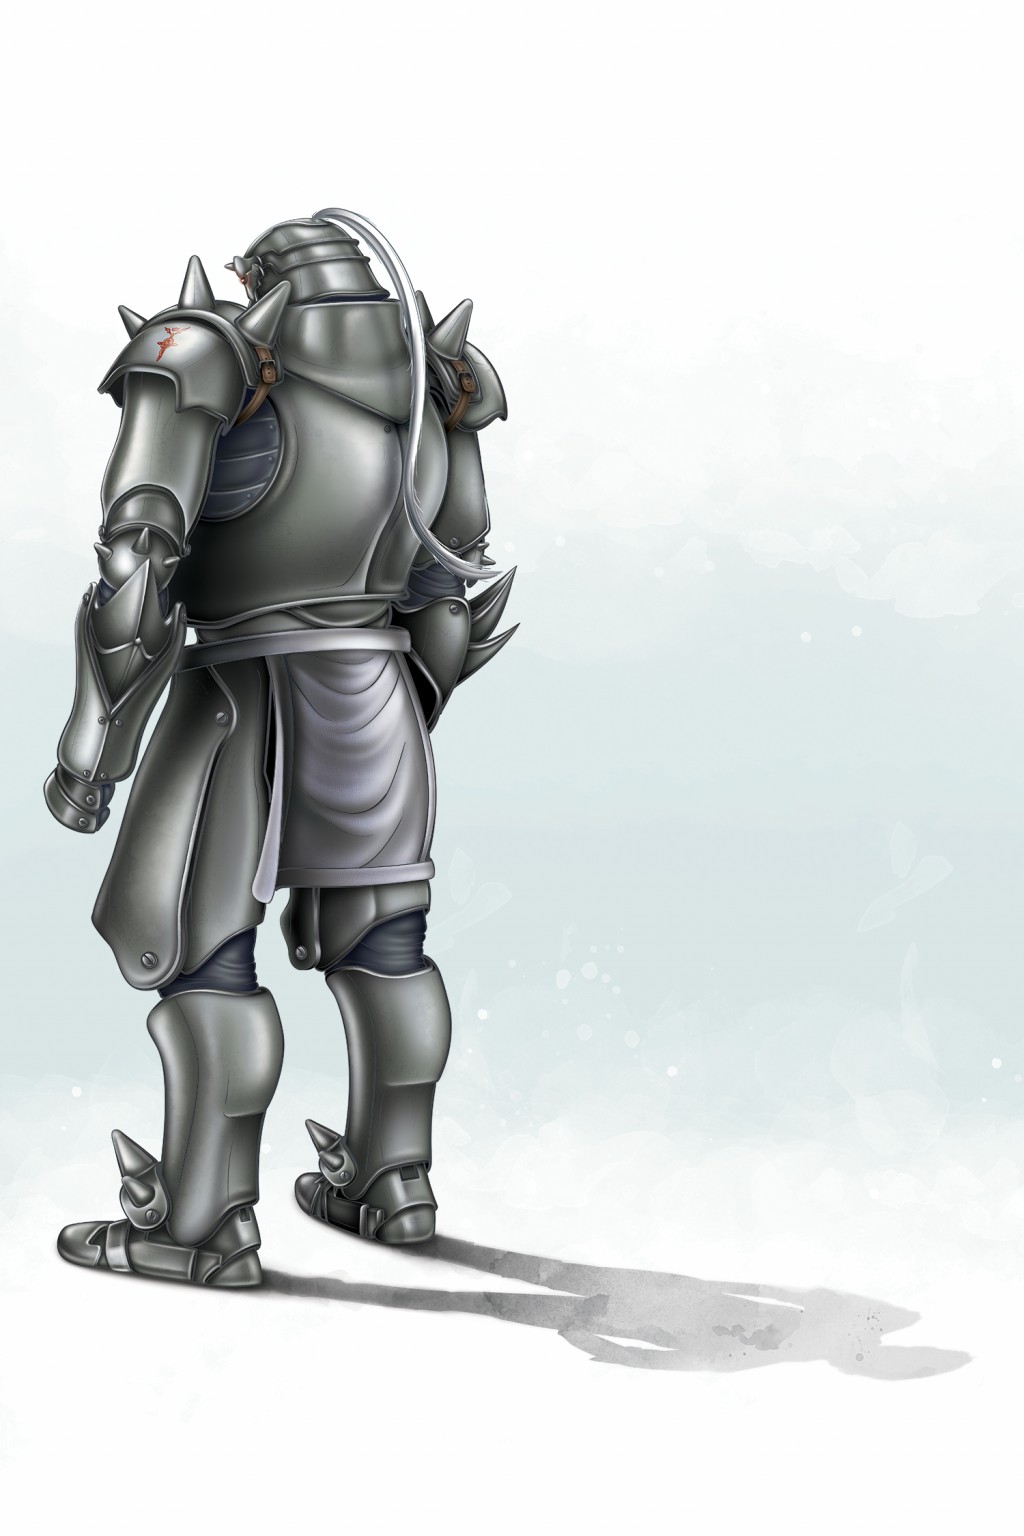 Color Photoshop painting of Alphonse Elric from Full Metal Alchemist. A Suit of Armor on a green background.